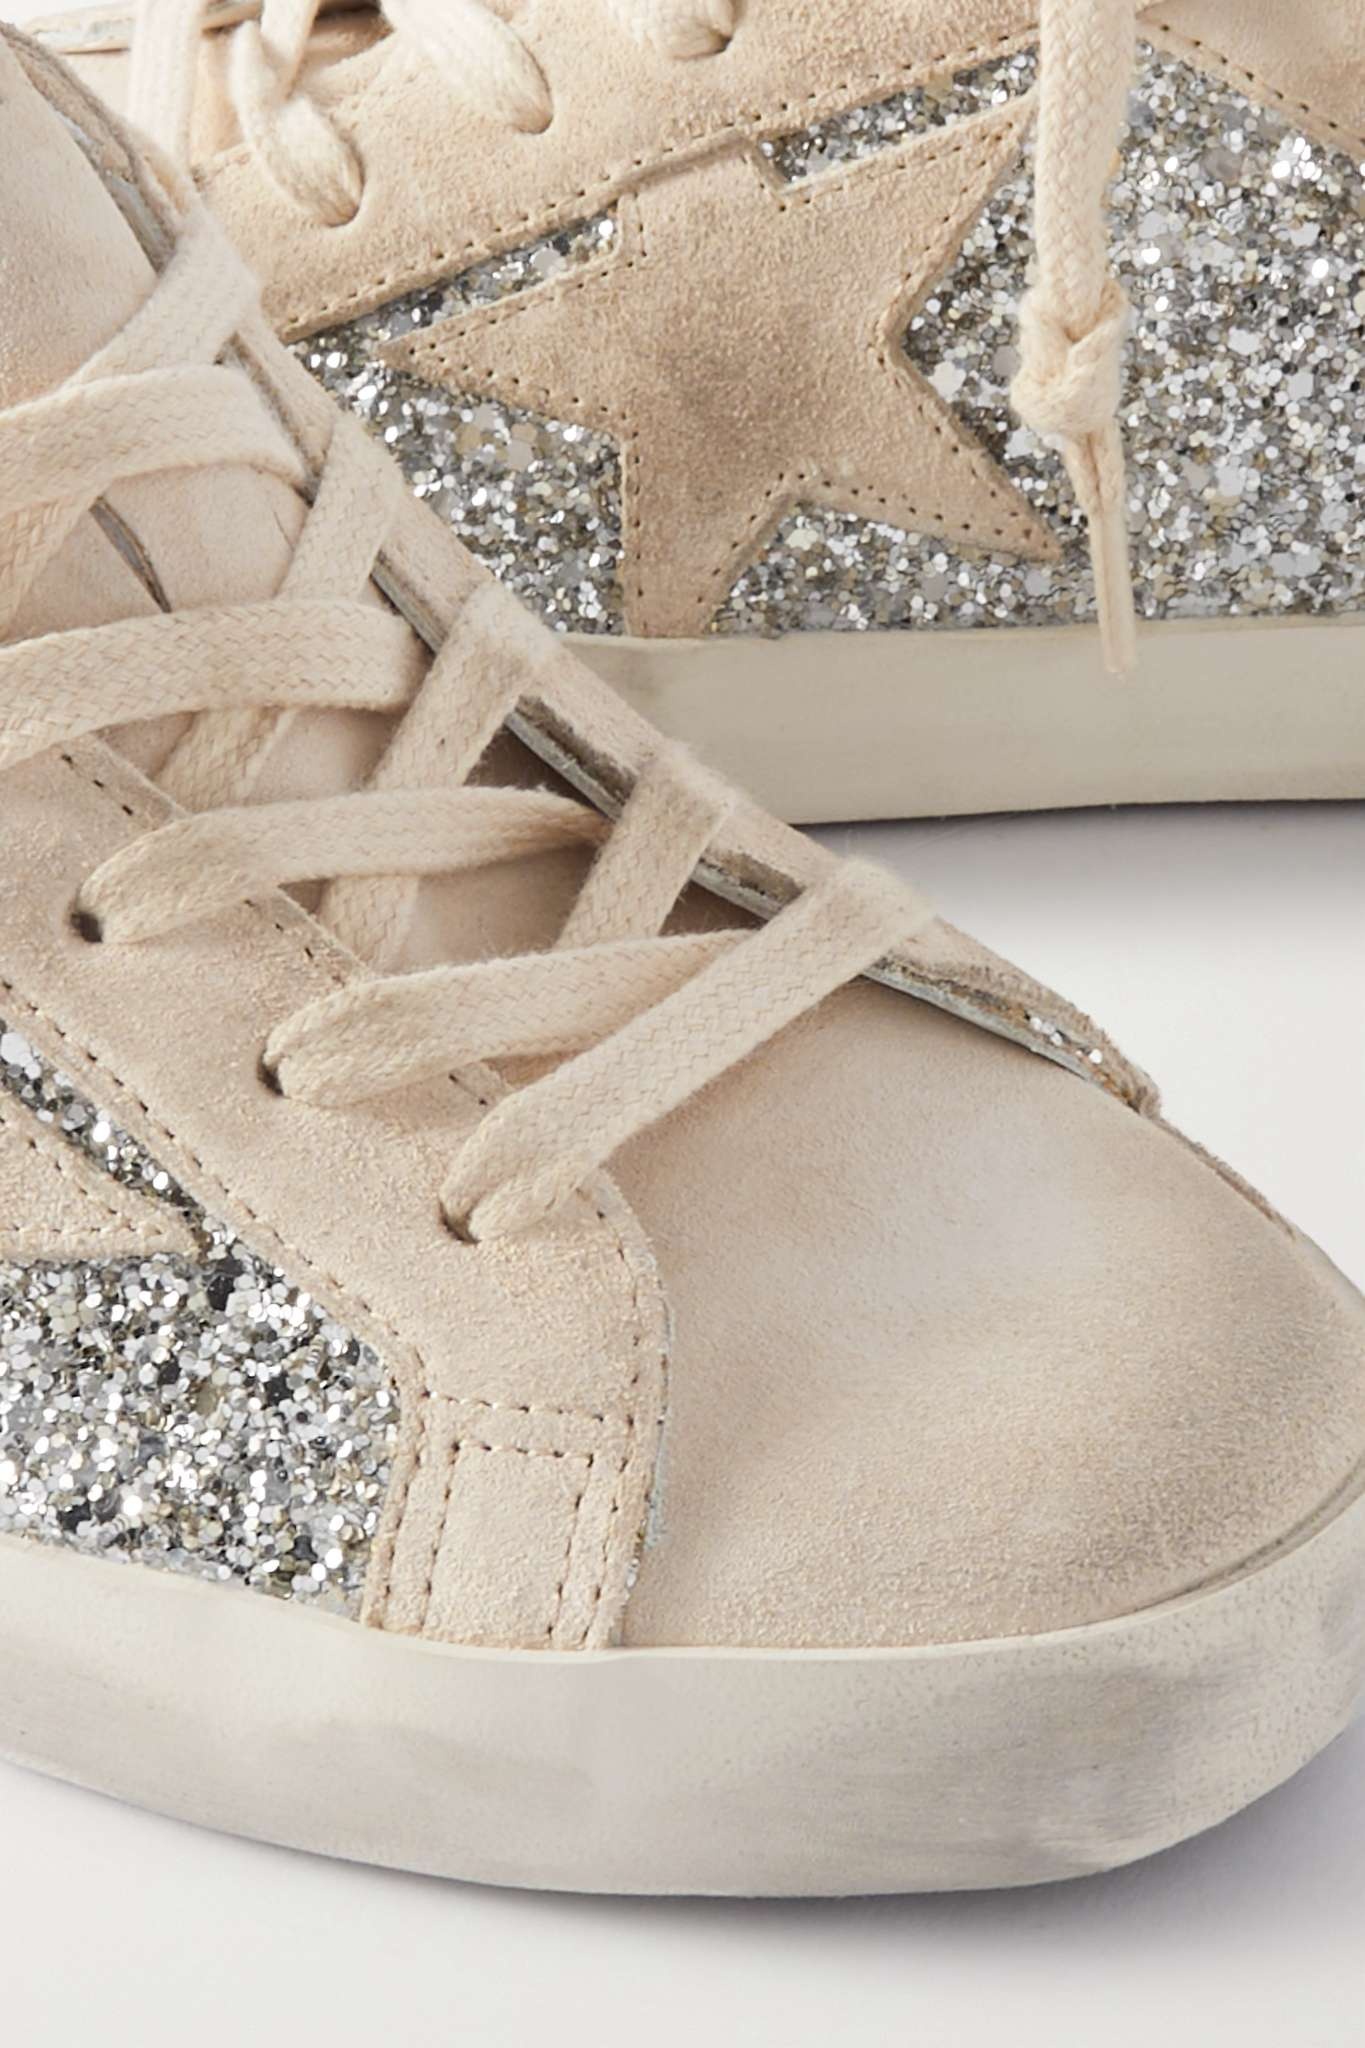 Super-Star leather-trimmed distressed glittered suede sneakers - 4